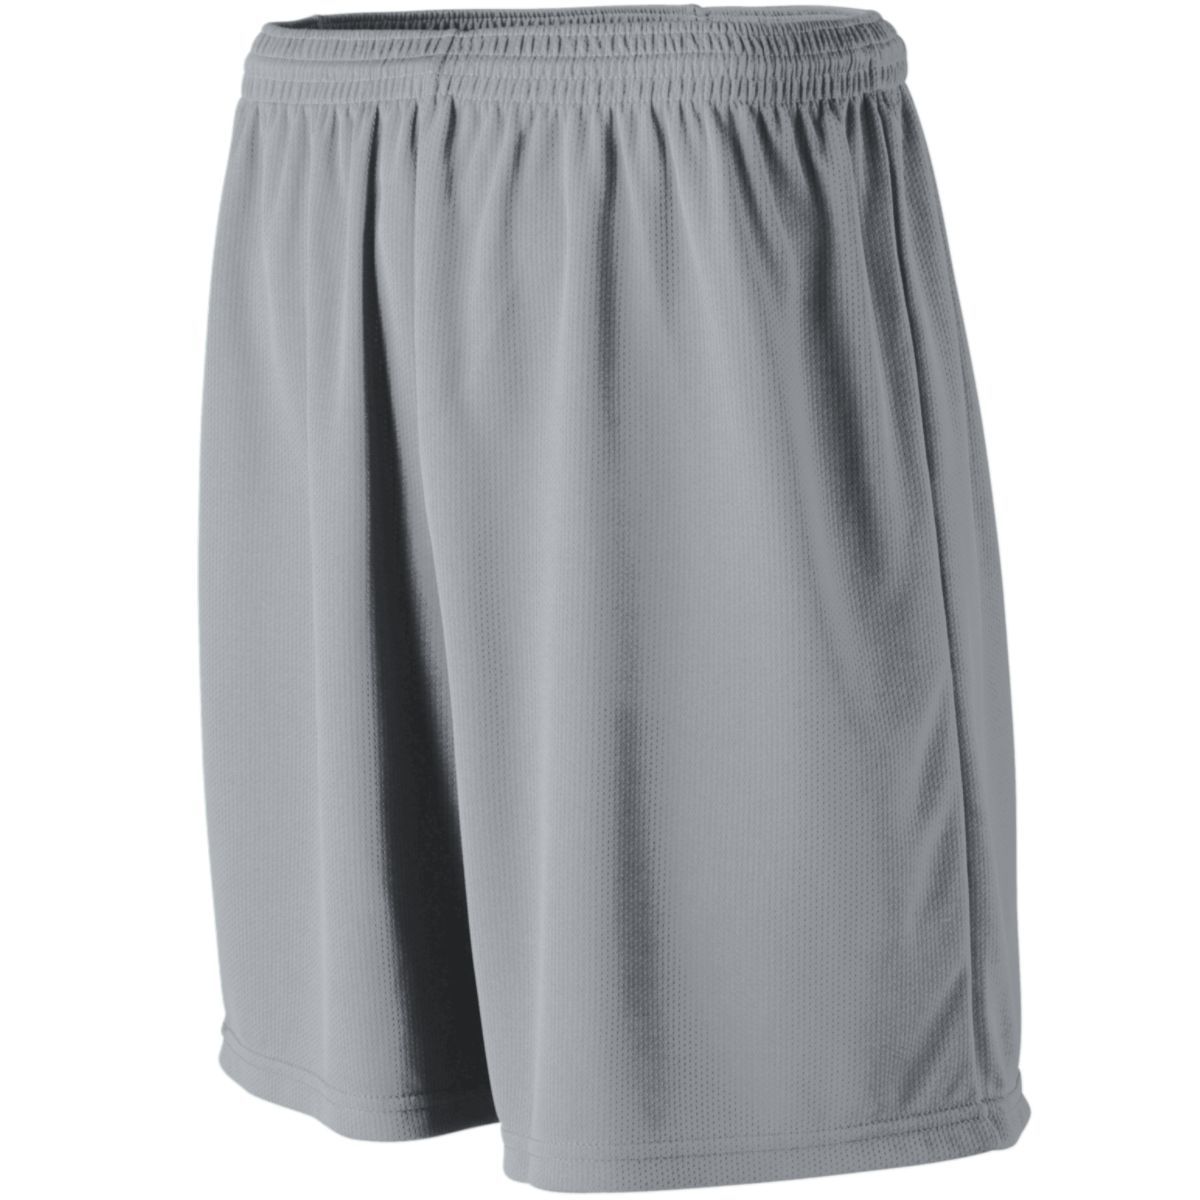 Youth Wicking Mesh Athletic Shorts 806